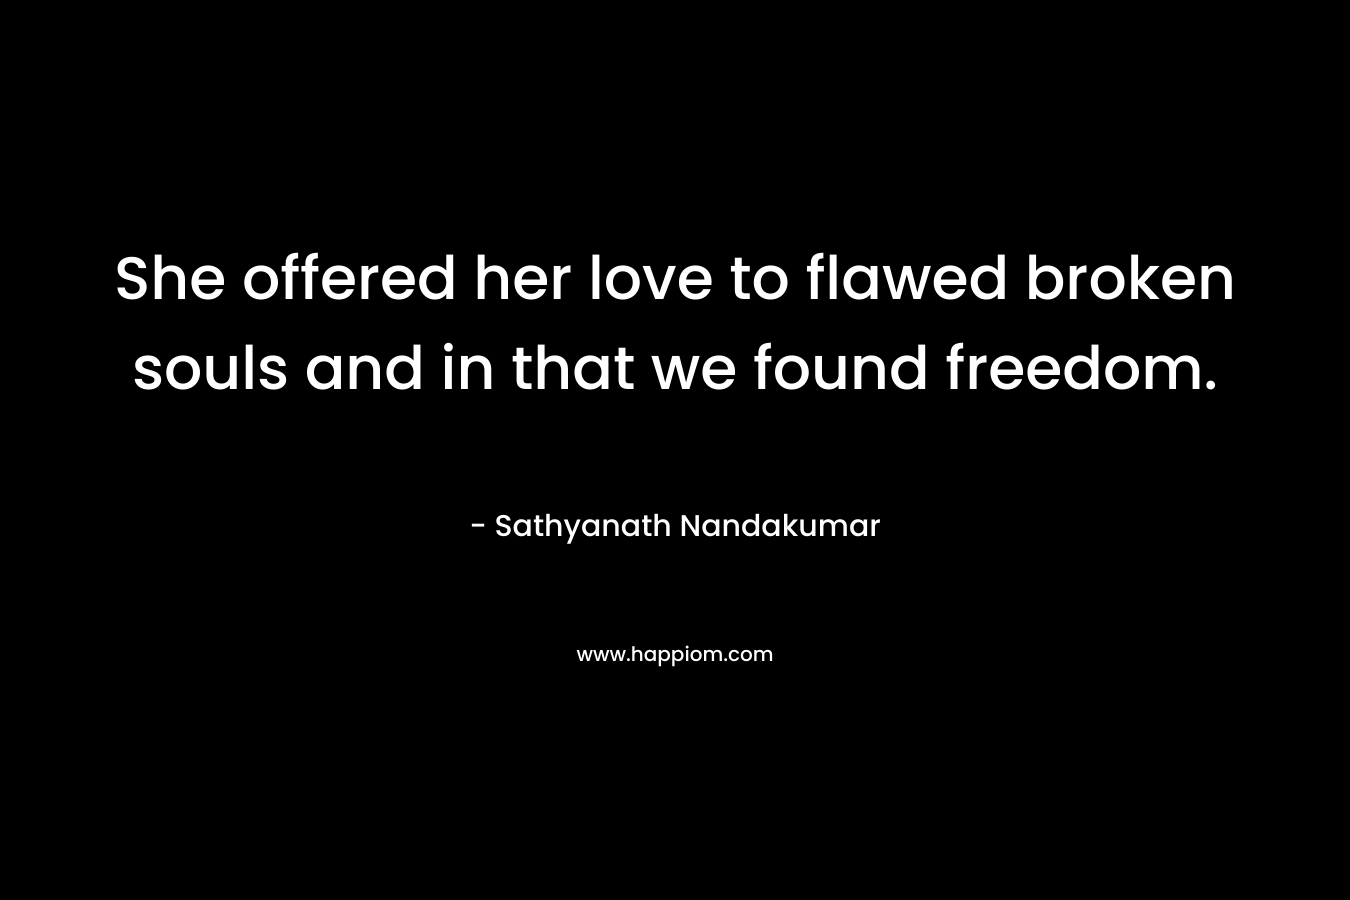 She offered her love to flawed broken souls and in that we found freedom.